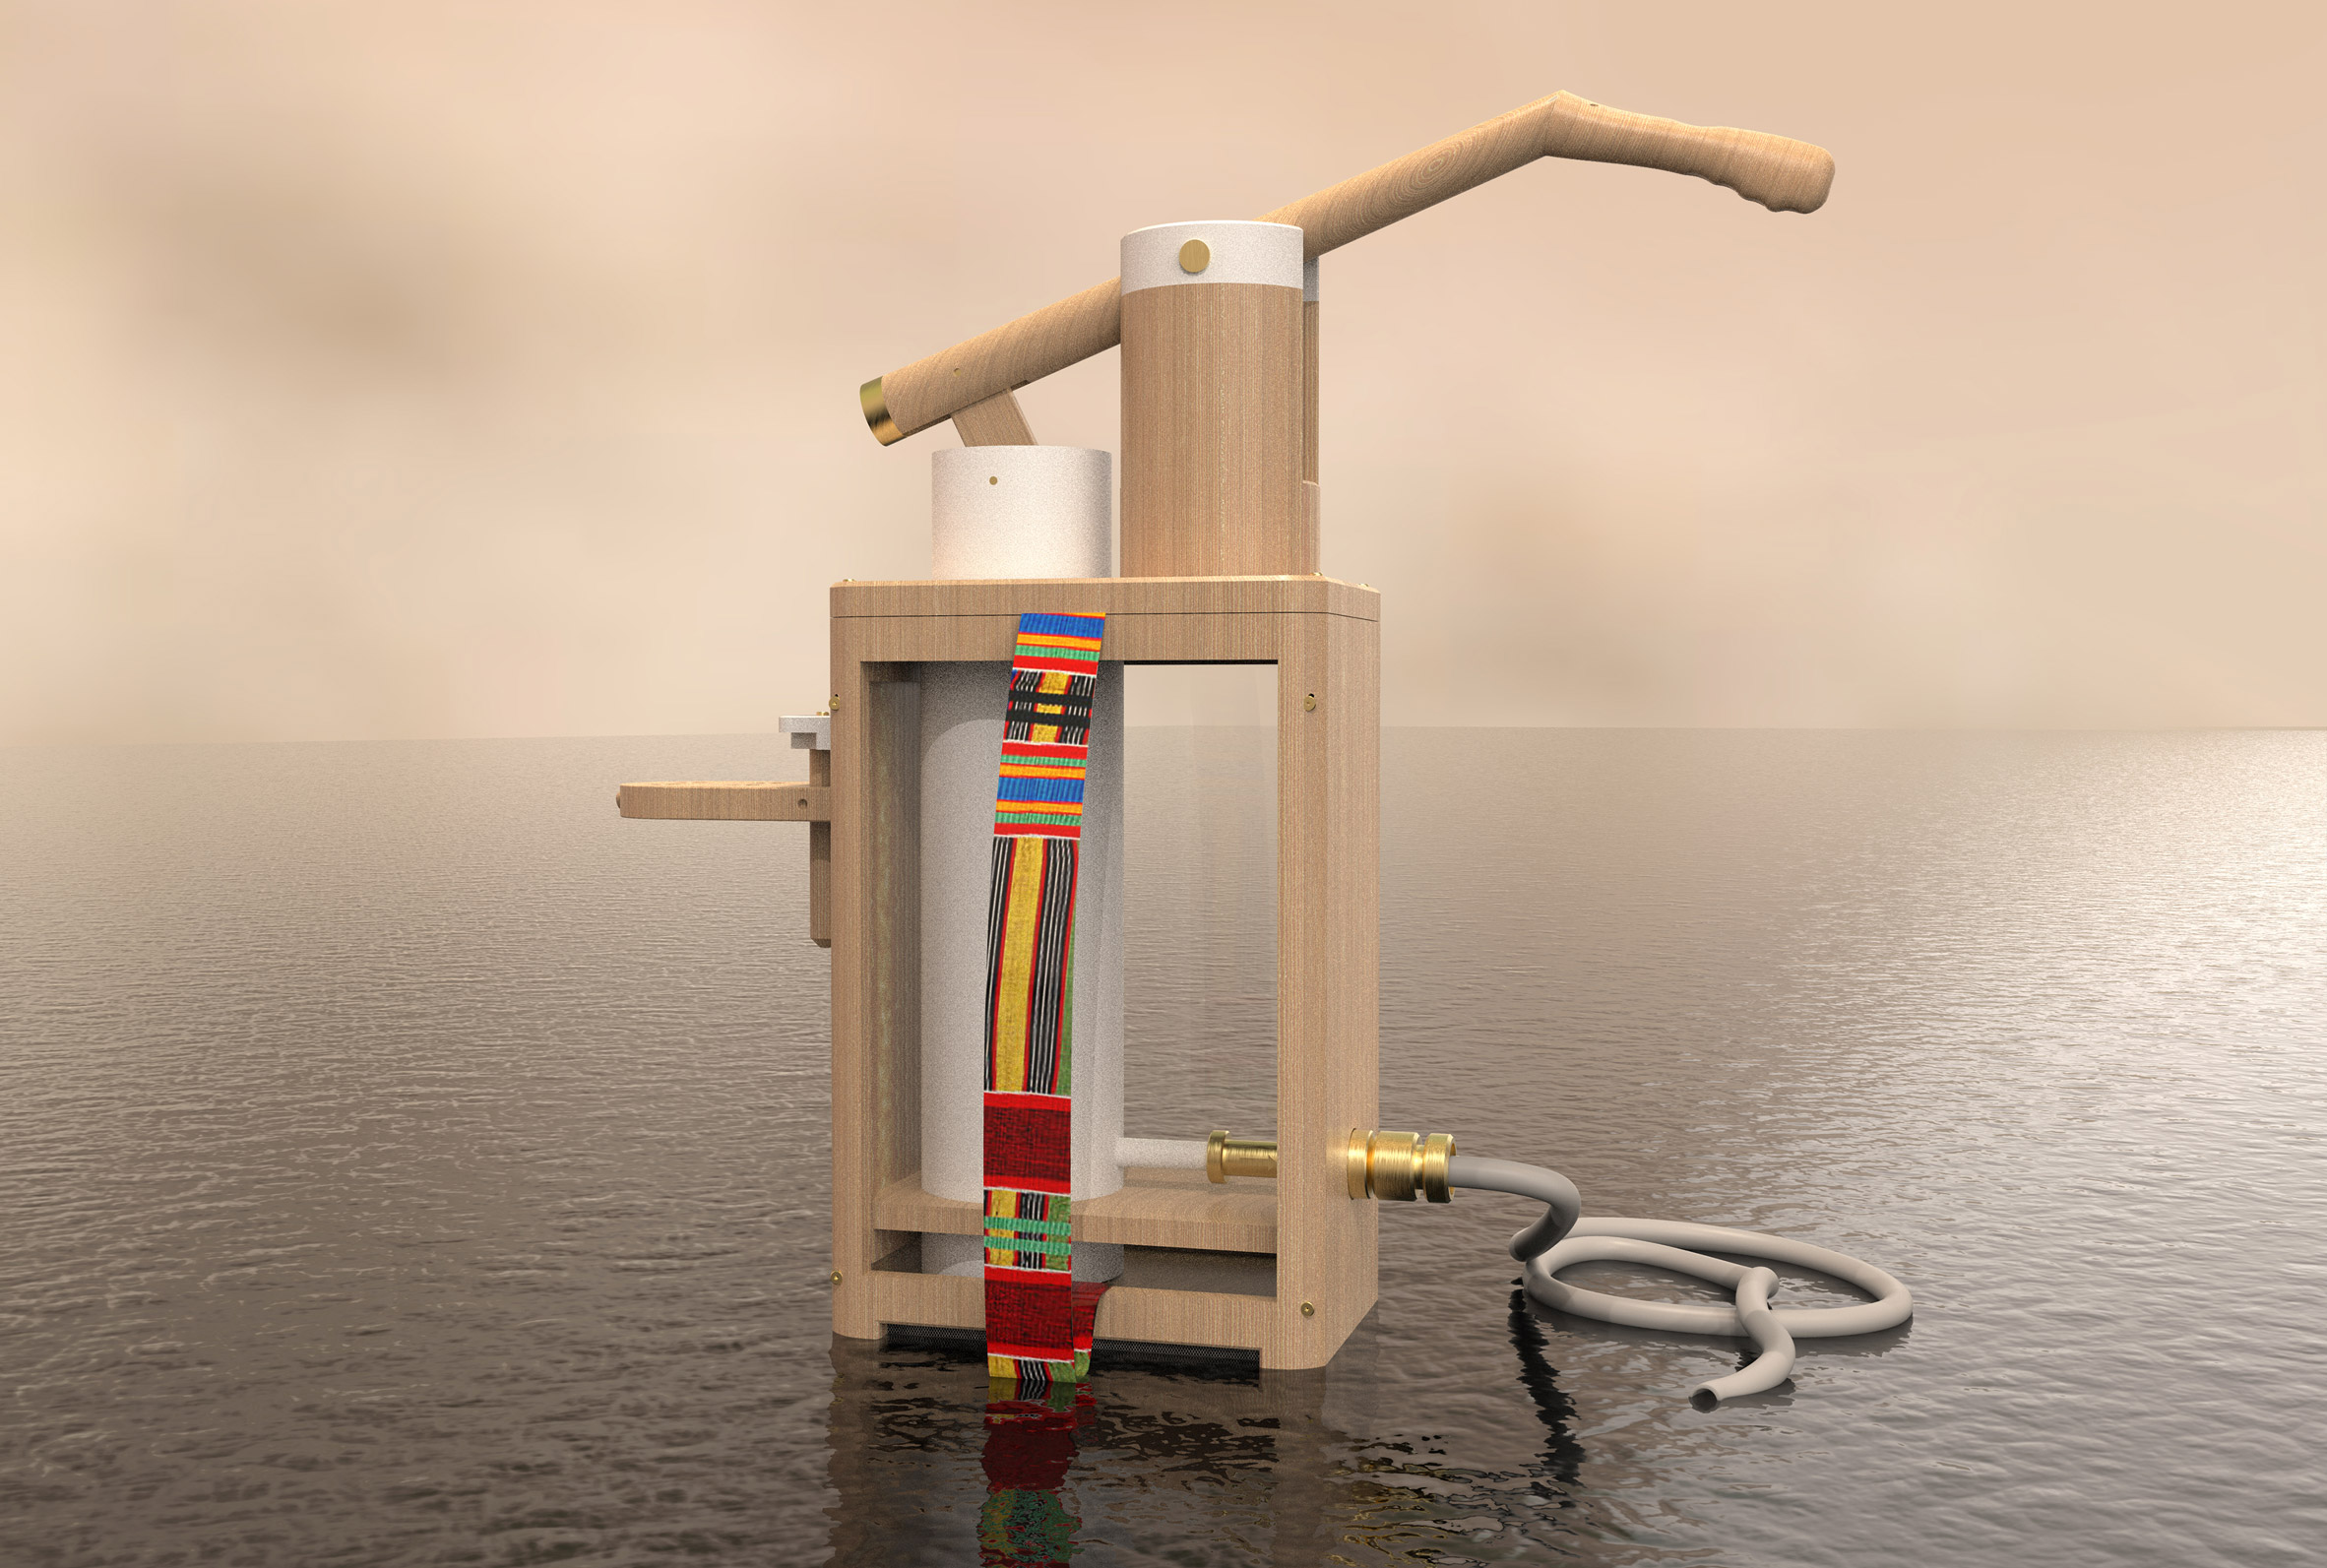 Colourful manual water pump by University of Leeds student